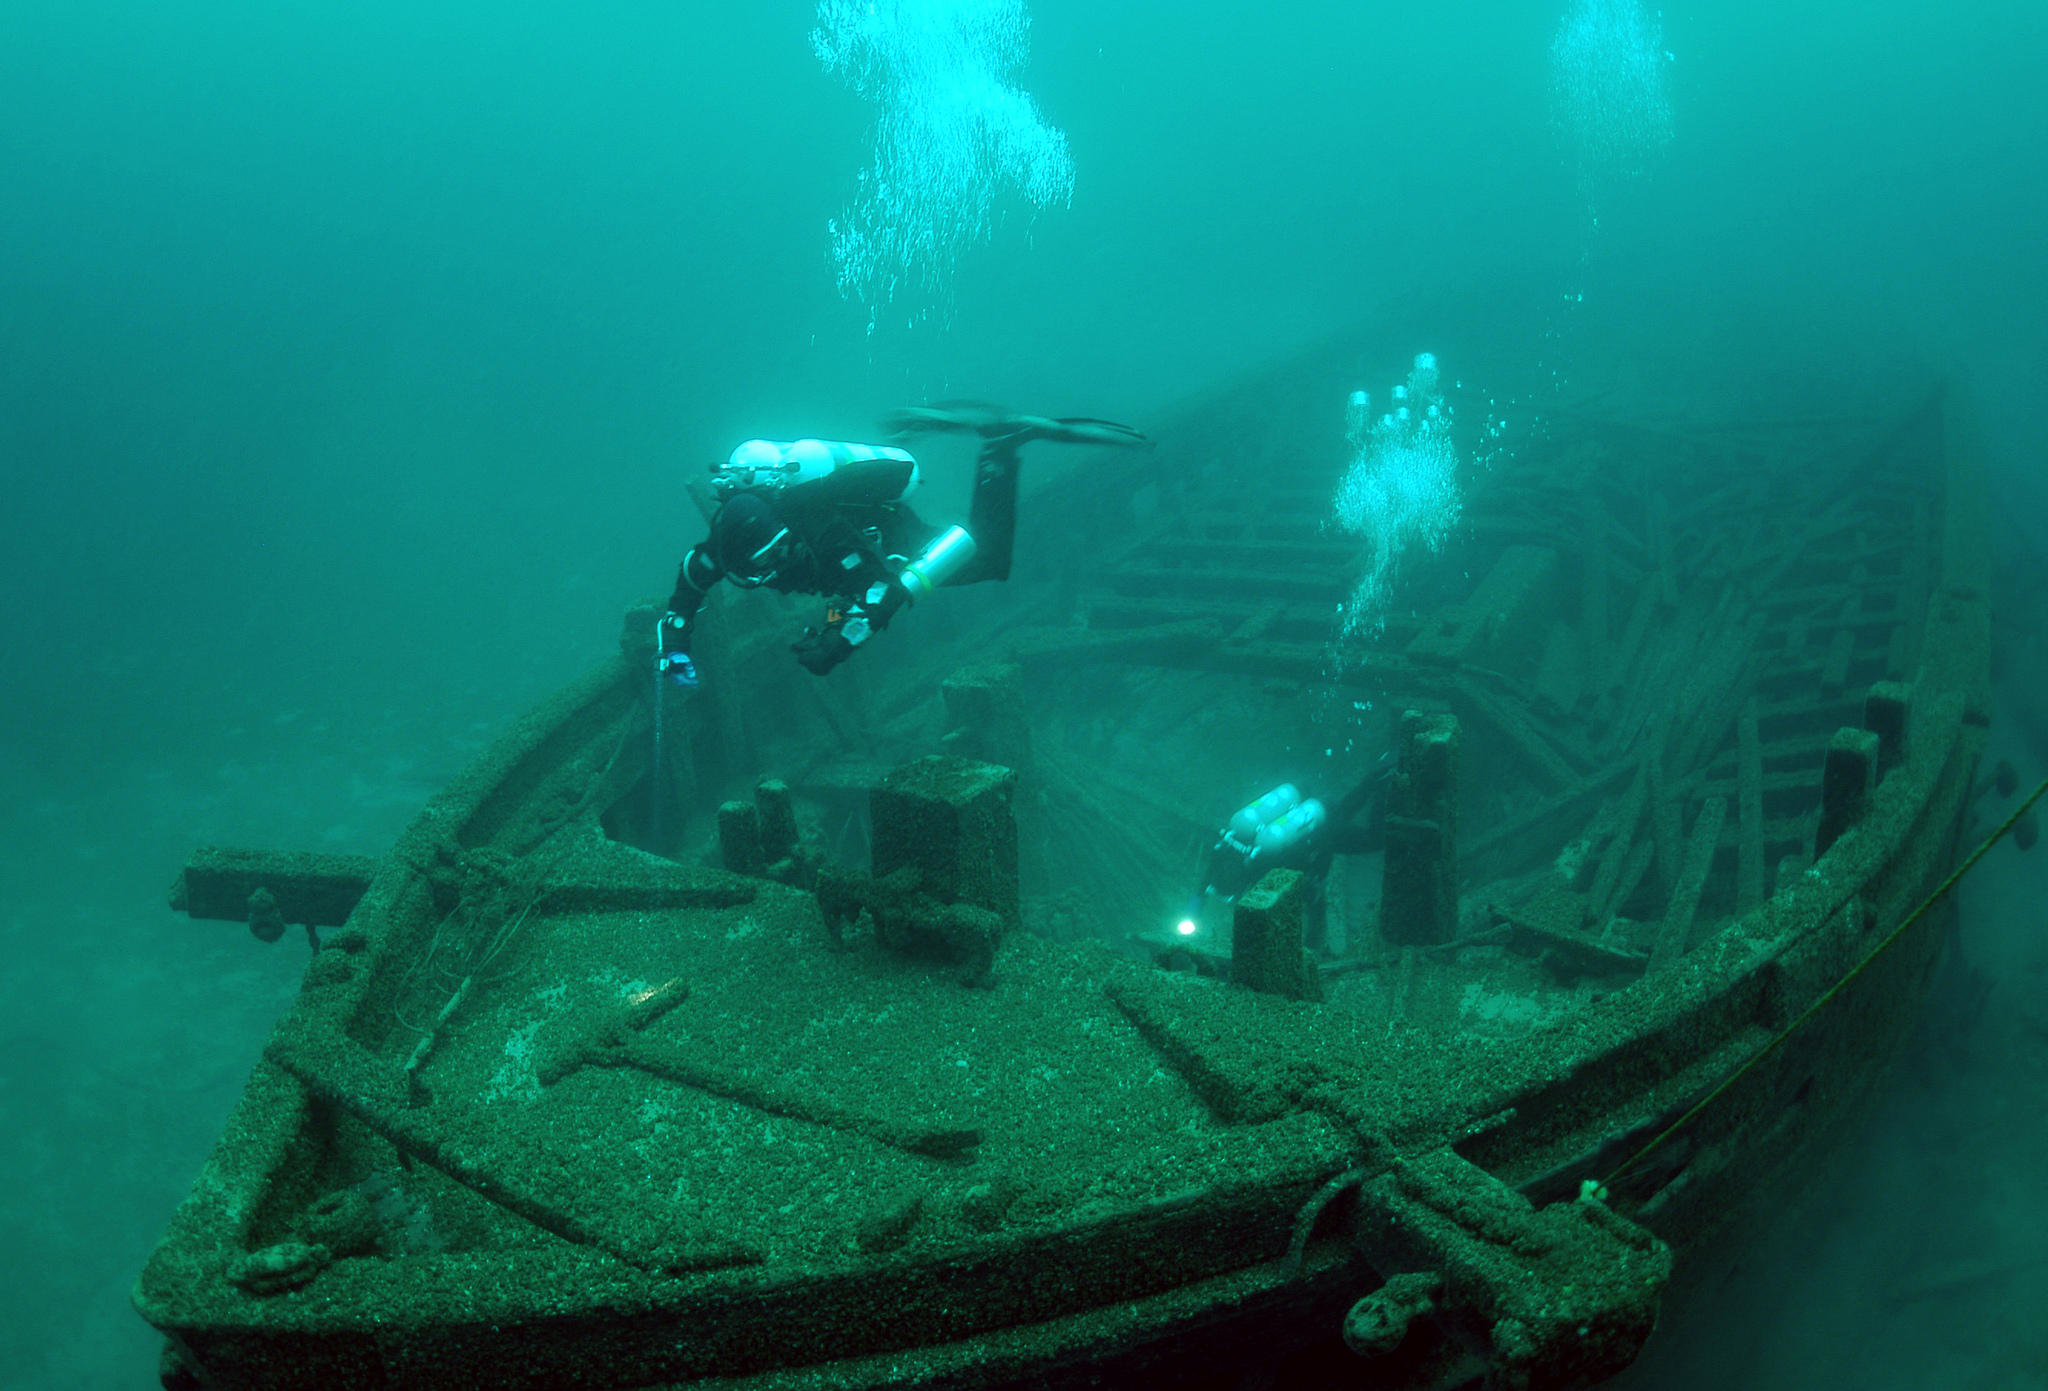 Shipwreck found at the bottom of Lake Michigan, Mysterious Treasures